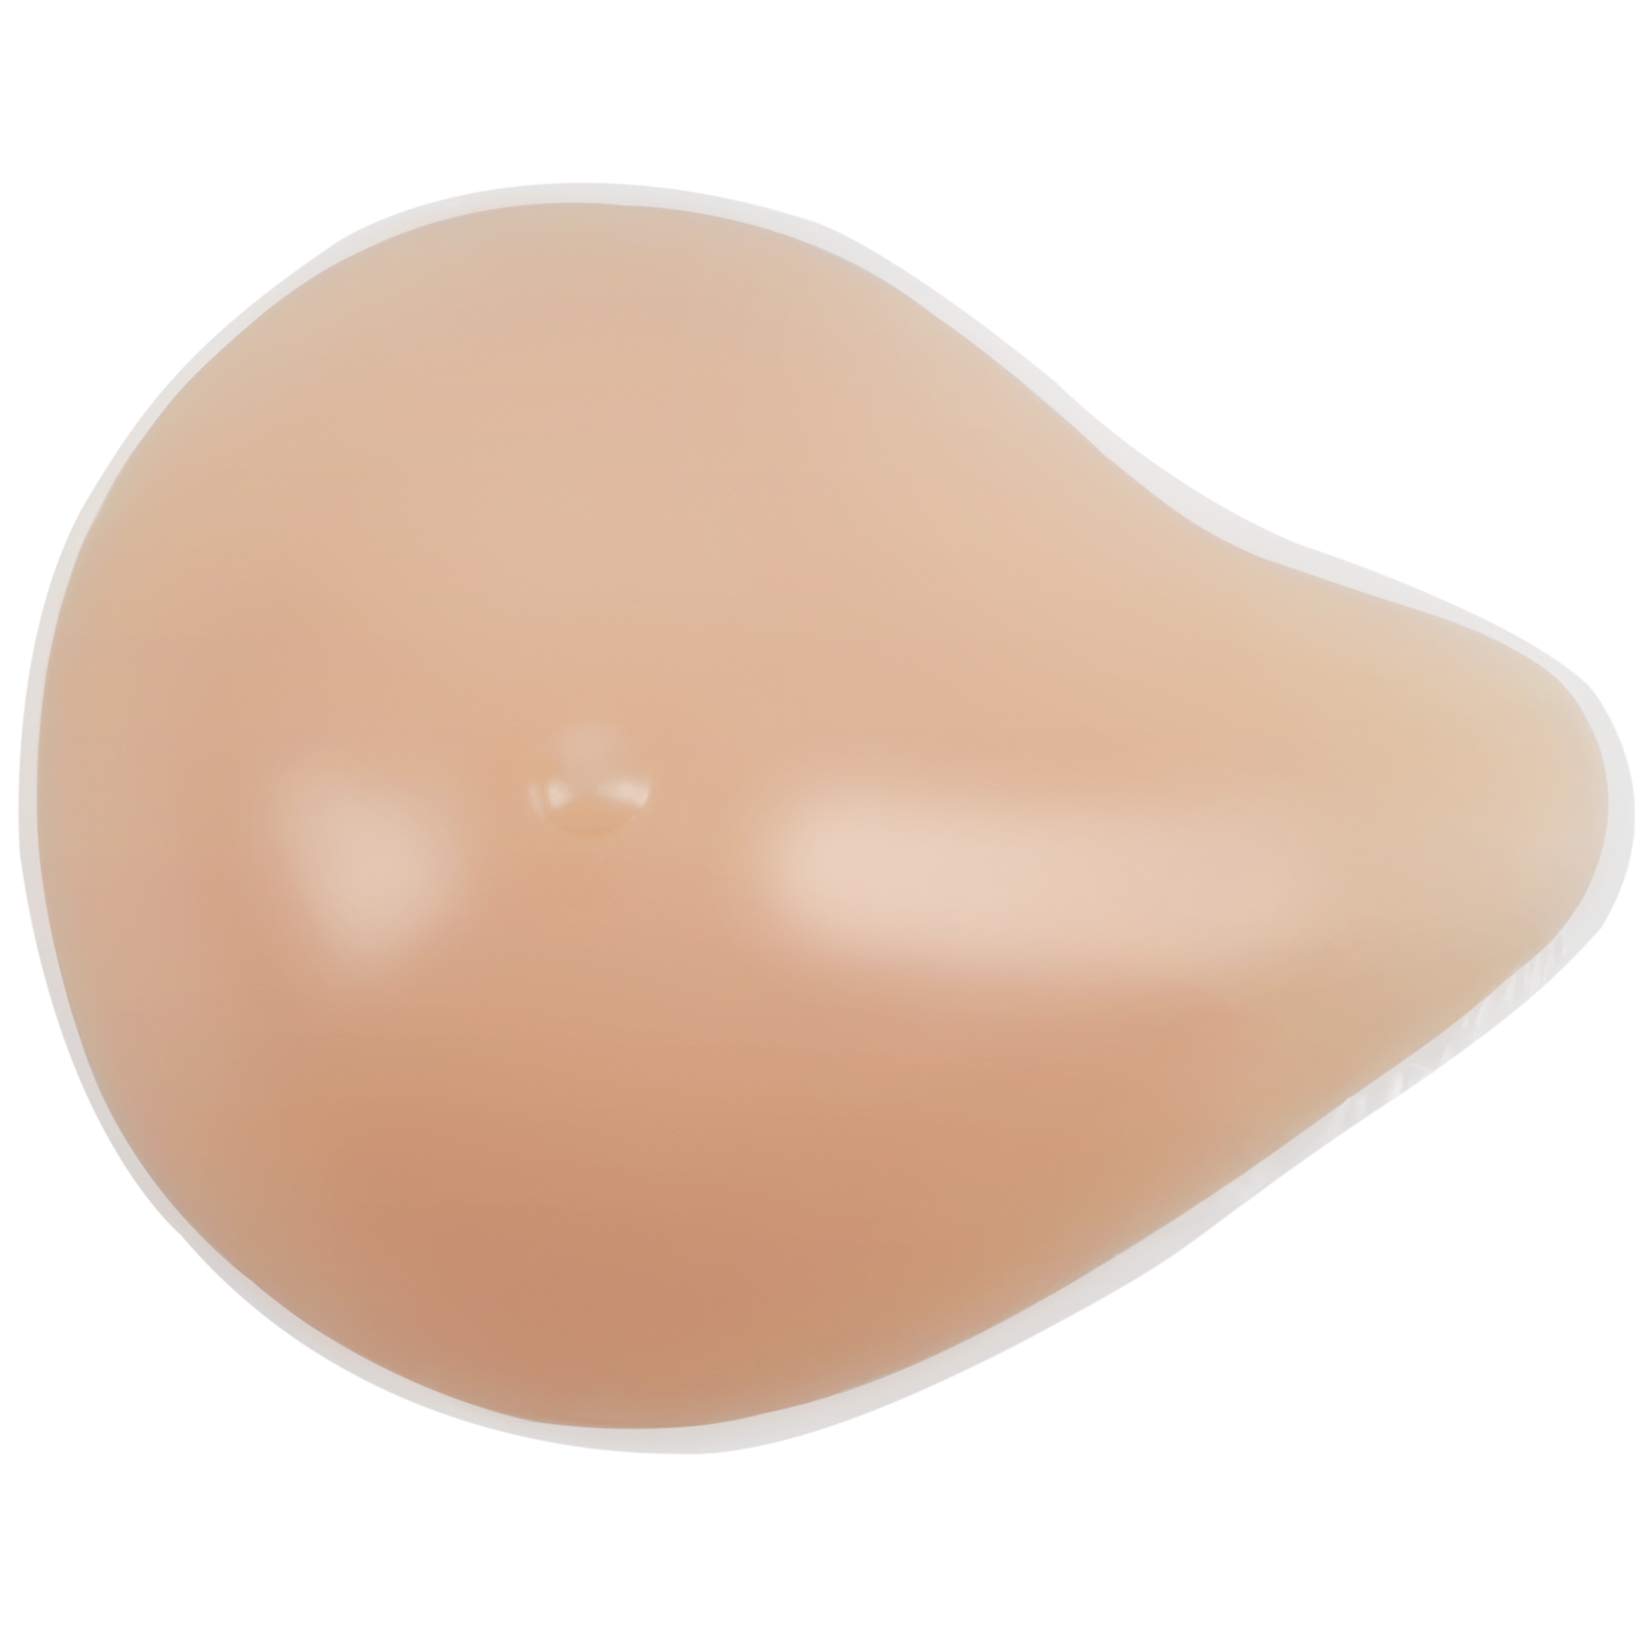 Vollence One Piece D Cup Side Silicone Breast Forms Fake Boobs Women Concave Bra Pad Enhancers Mastectomy Prosthesis Crossdresser Transgender Cosplay